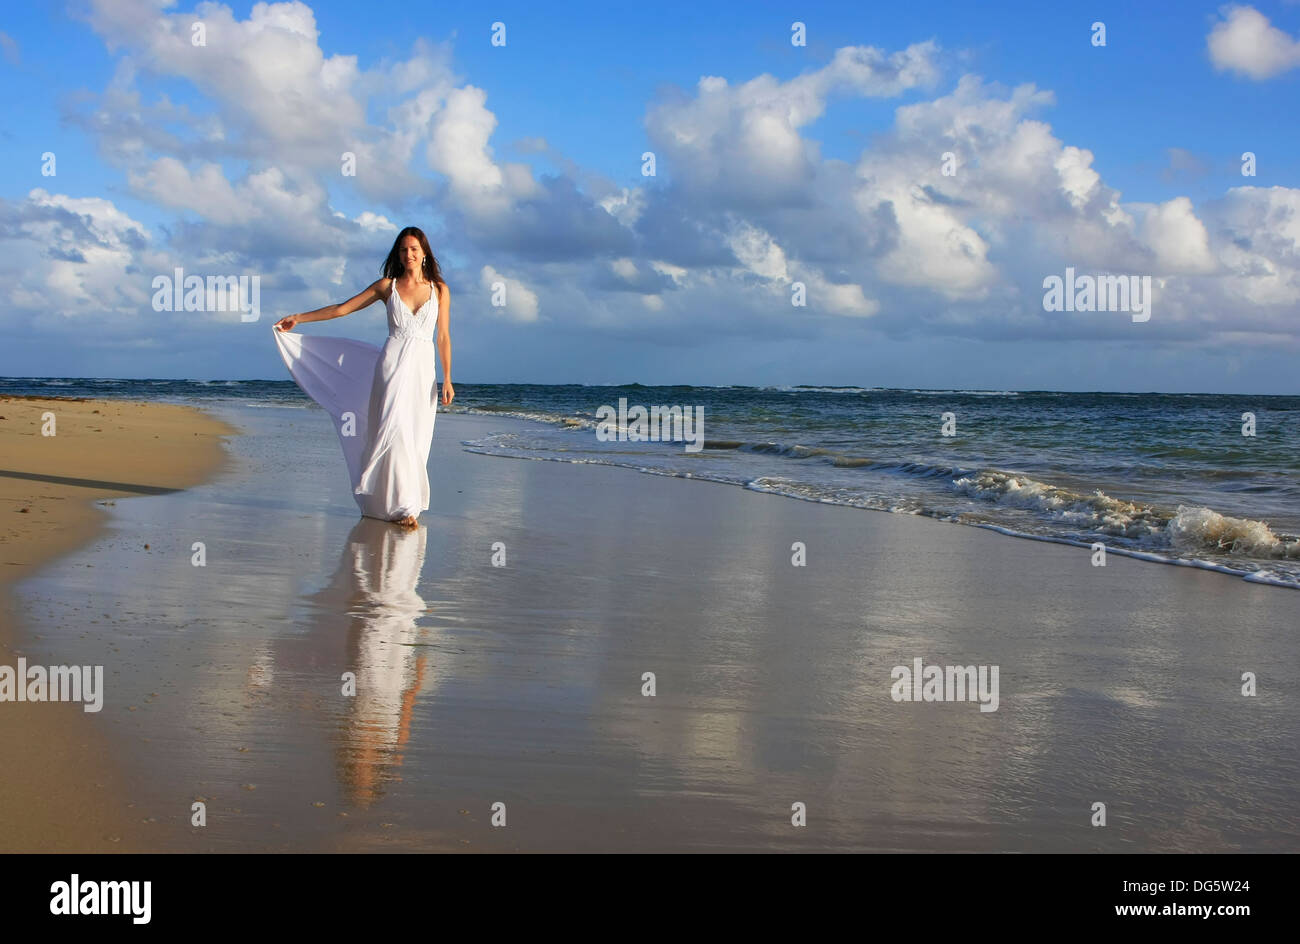 Young woman in white dress on a beach Stock Photo